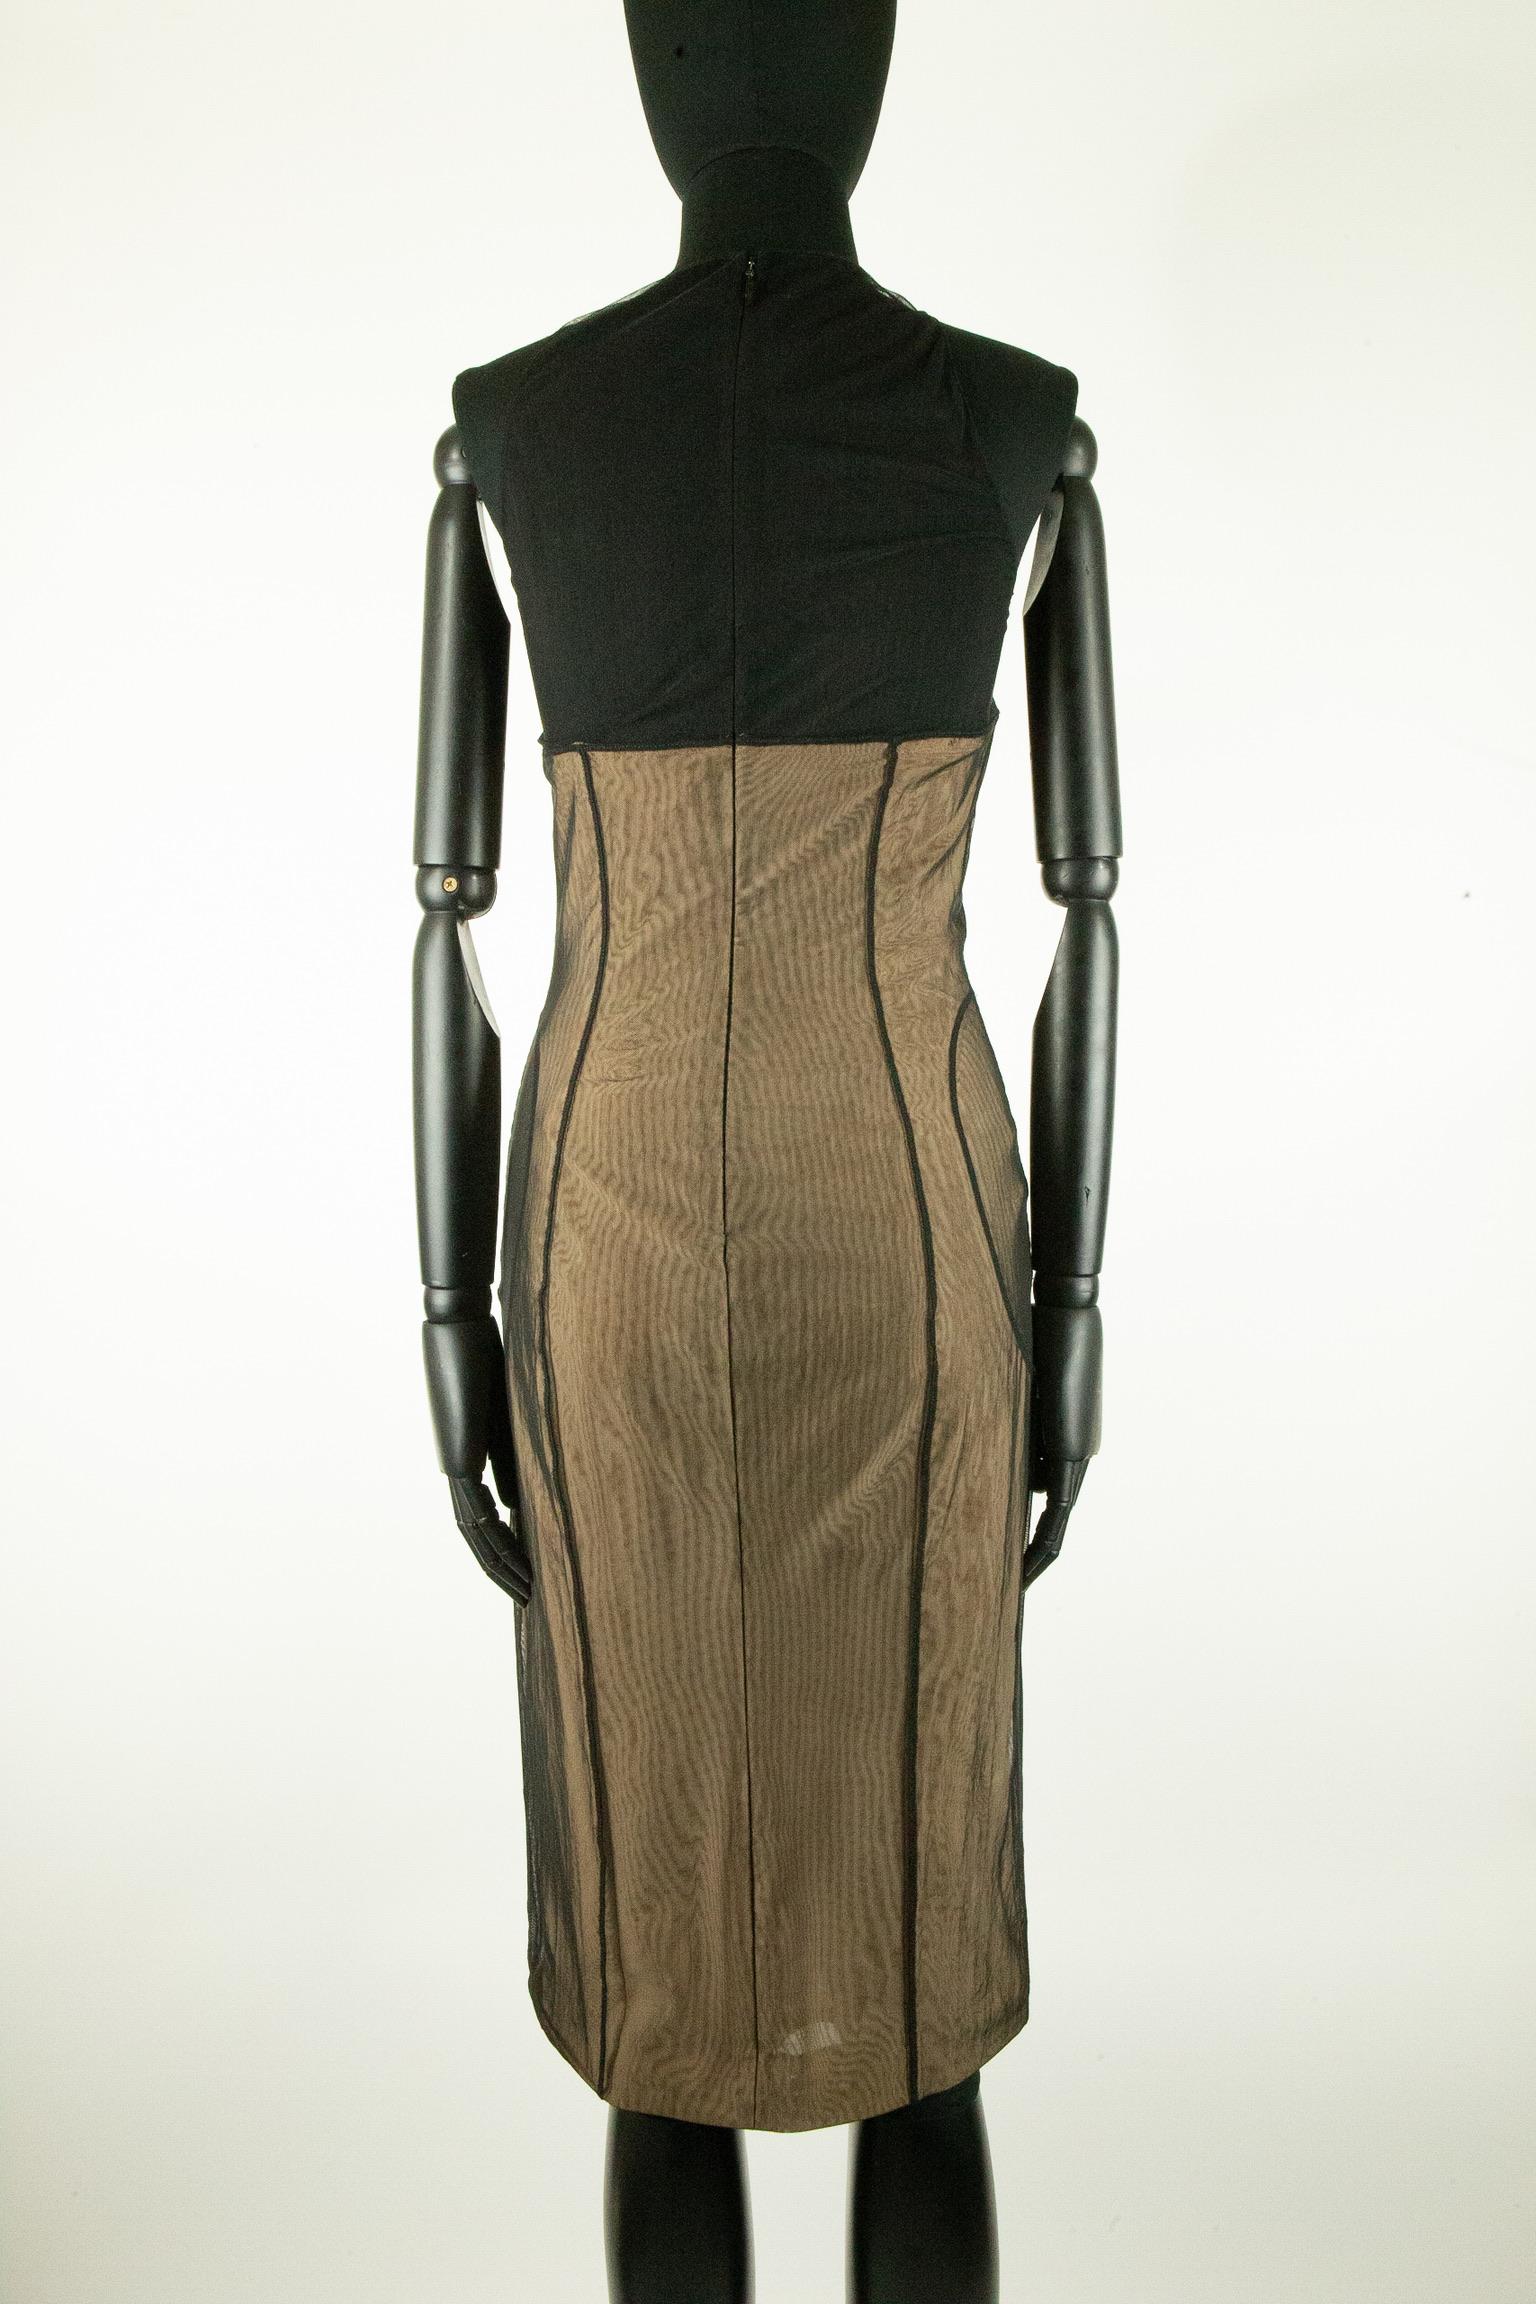 2001 Gucci by Tom Ford Black Stretch Tulle Dress In Good Condition For Sale In London, GB